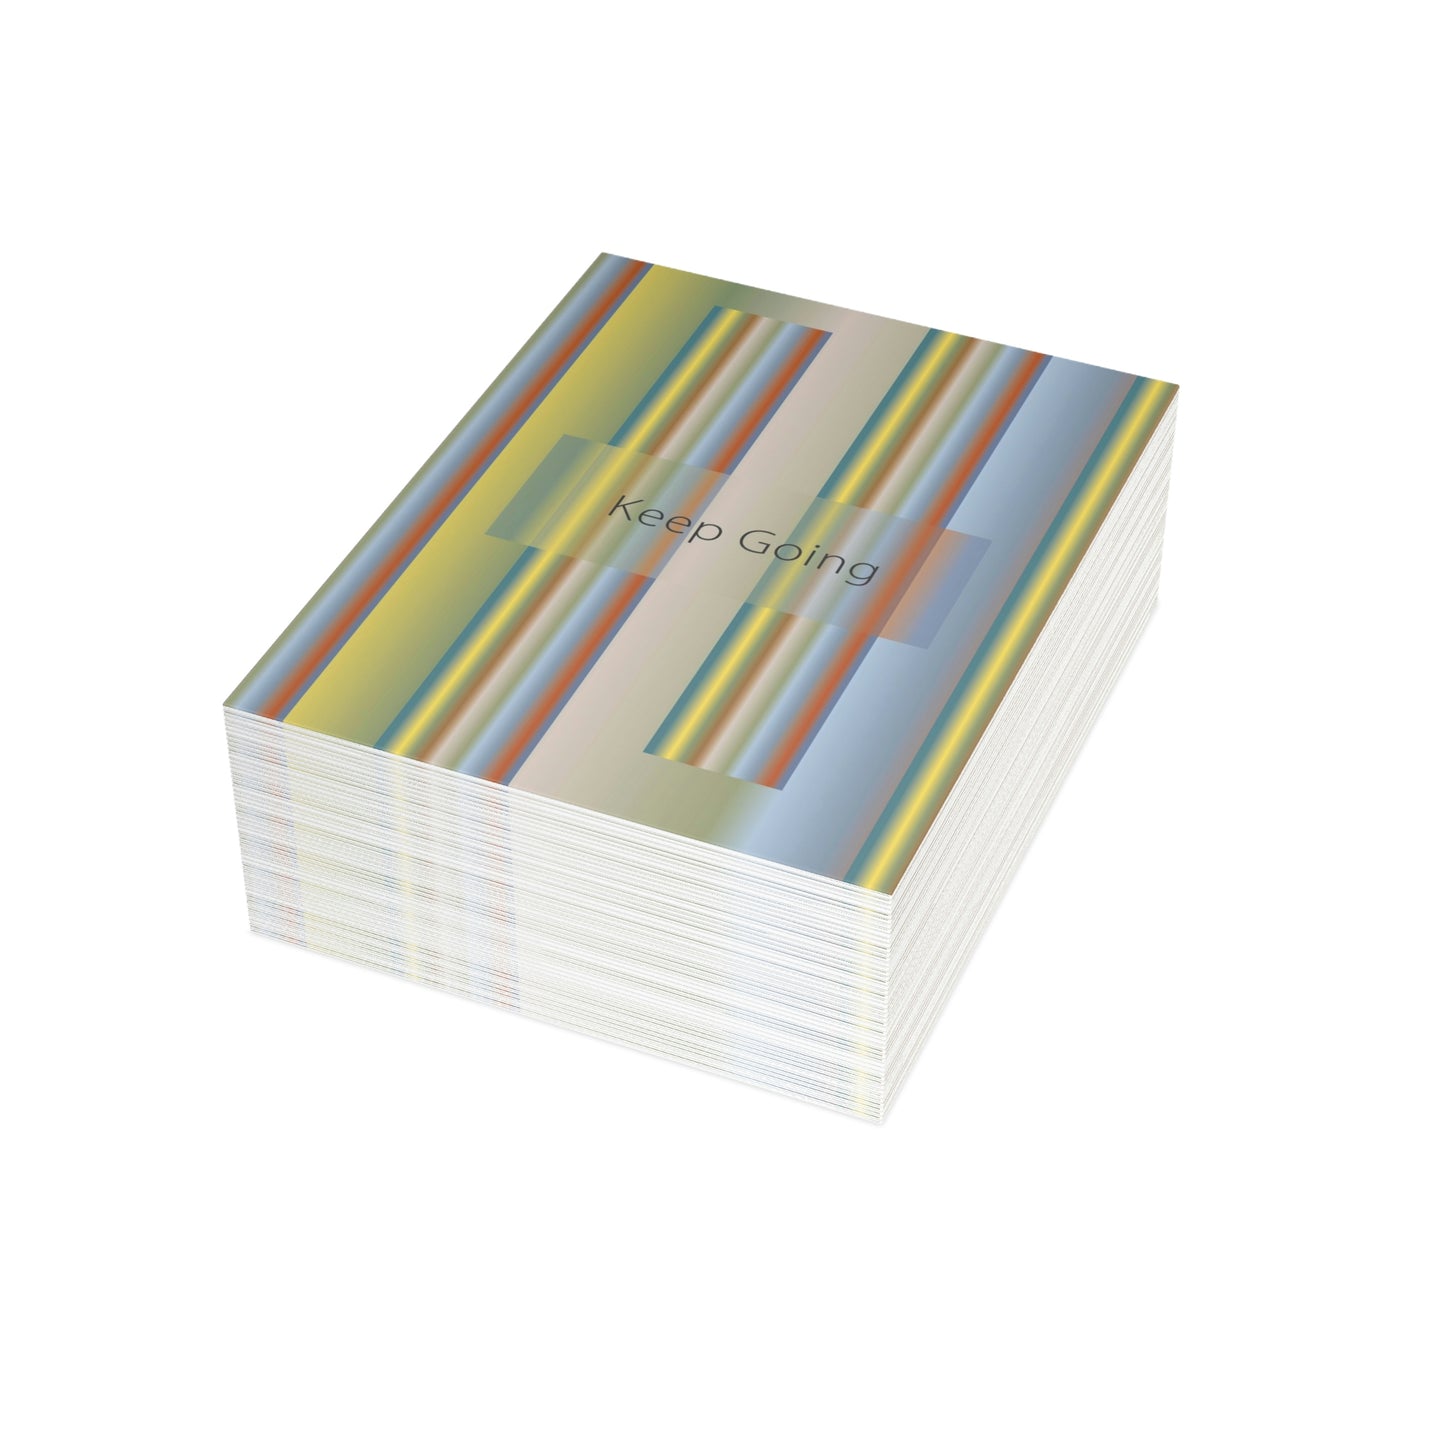 Folded Greeting Cards Vertical (1, 10, 30, and 50pcs) Keep Going - Design No.200